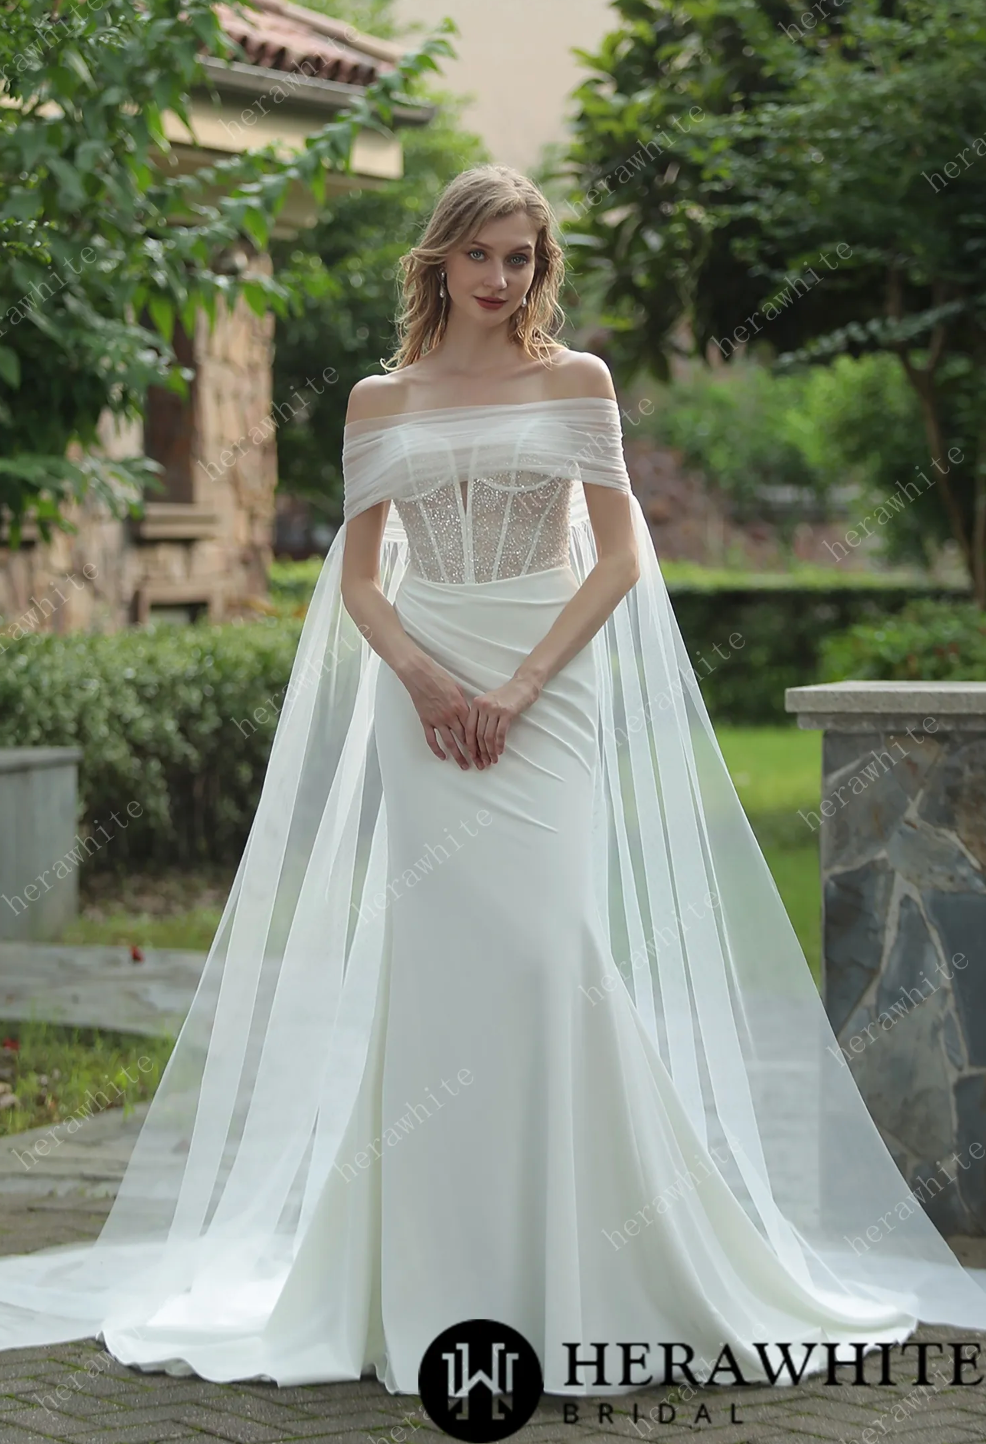 Plunging V-Neck Beaded Crepe Fit and Flare Wedding Dress